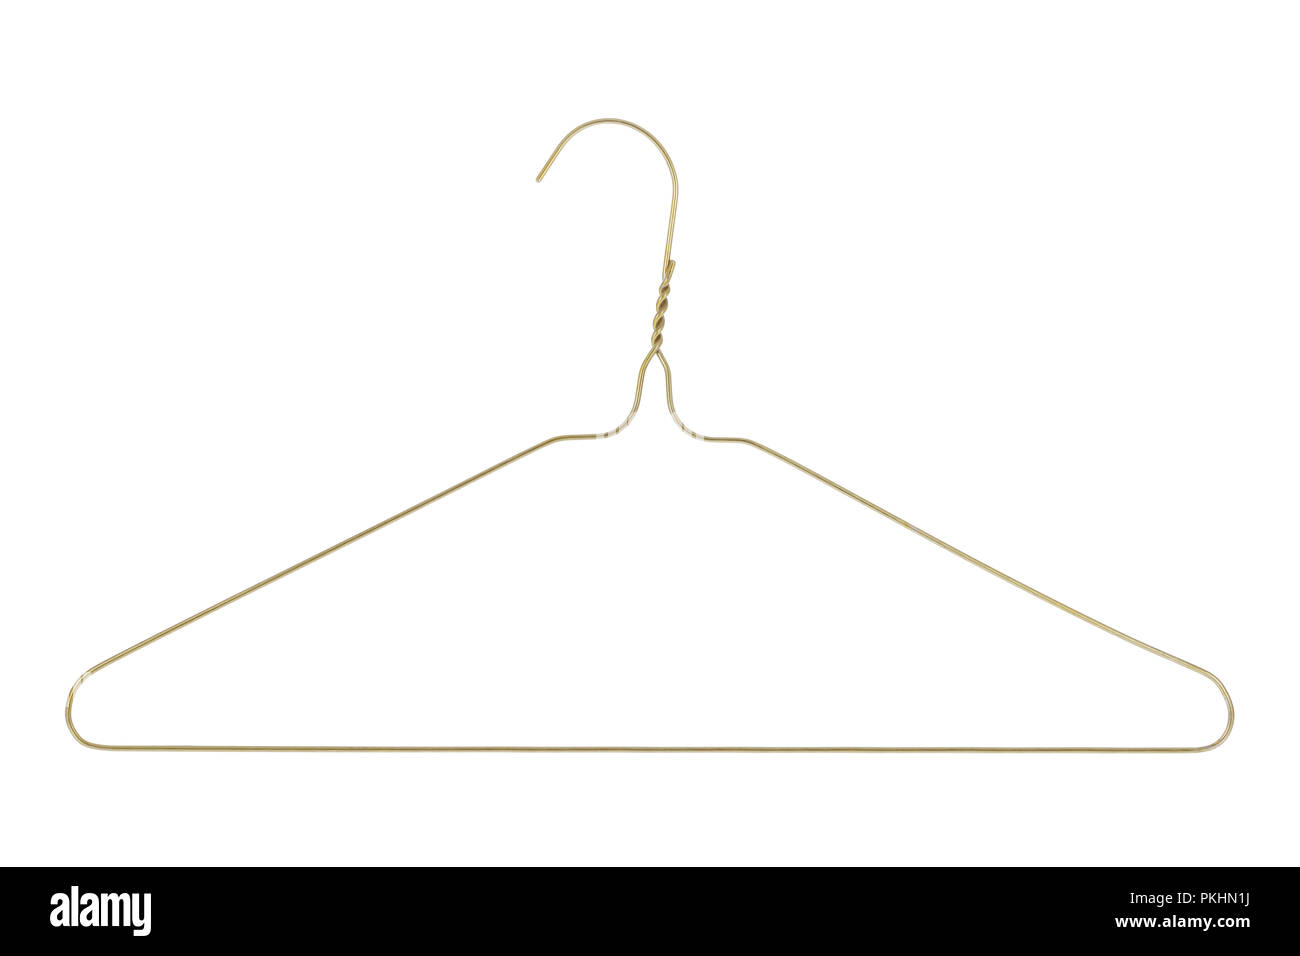 Gold colored wire clothes hanger isolated on a white background Stock Photo